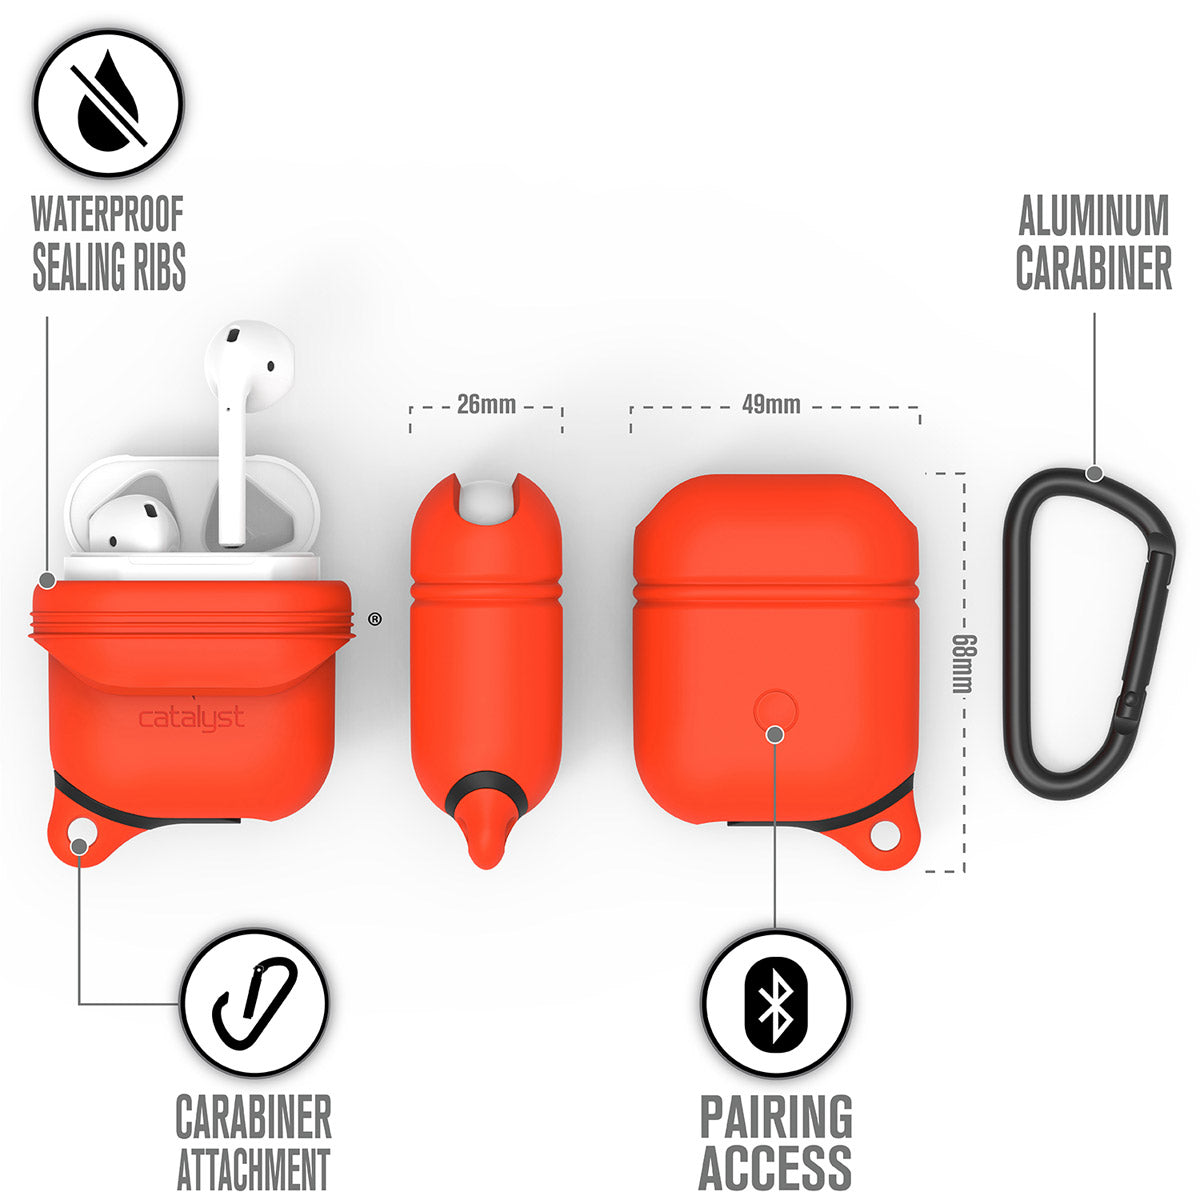 CATAPDSUN | Catalyst airpods gen2/1 waterproof case + carabiner showing the case dimension and features in sunset text reads waterproof sealing ribs aluminum carabiner pairing access carabiner attachment